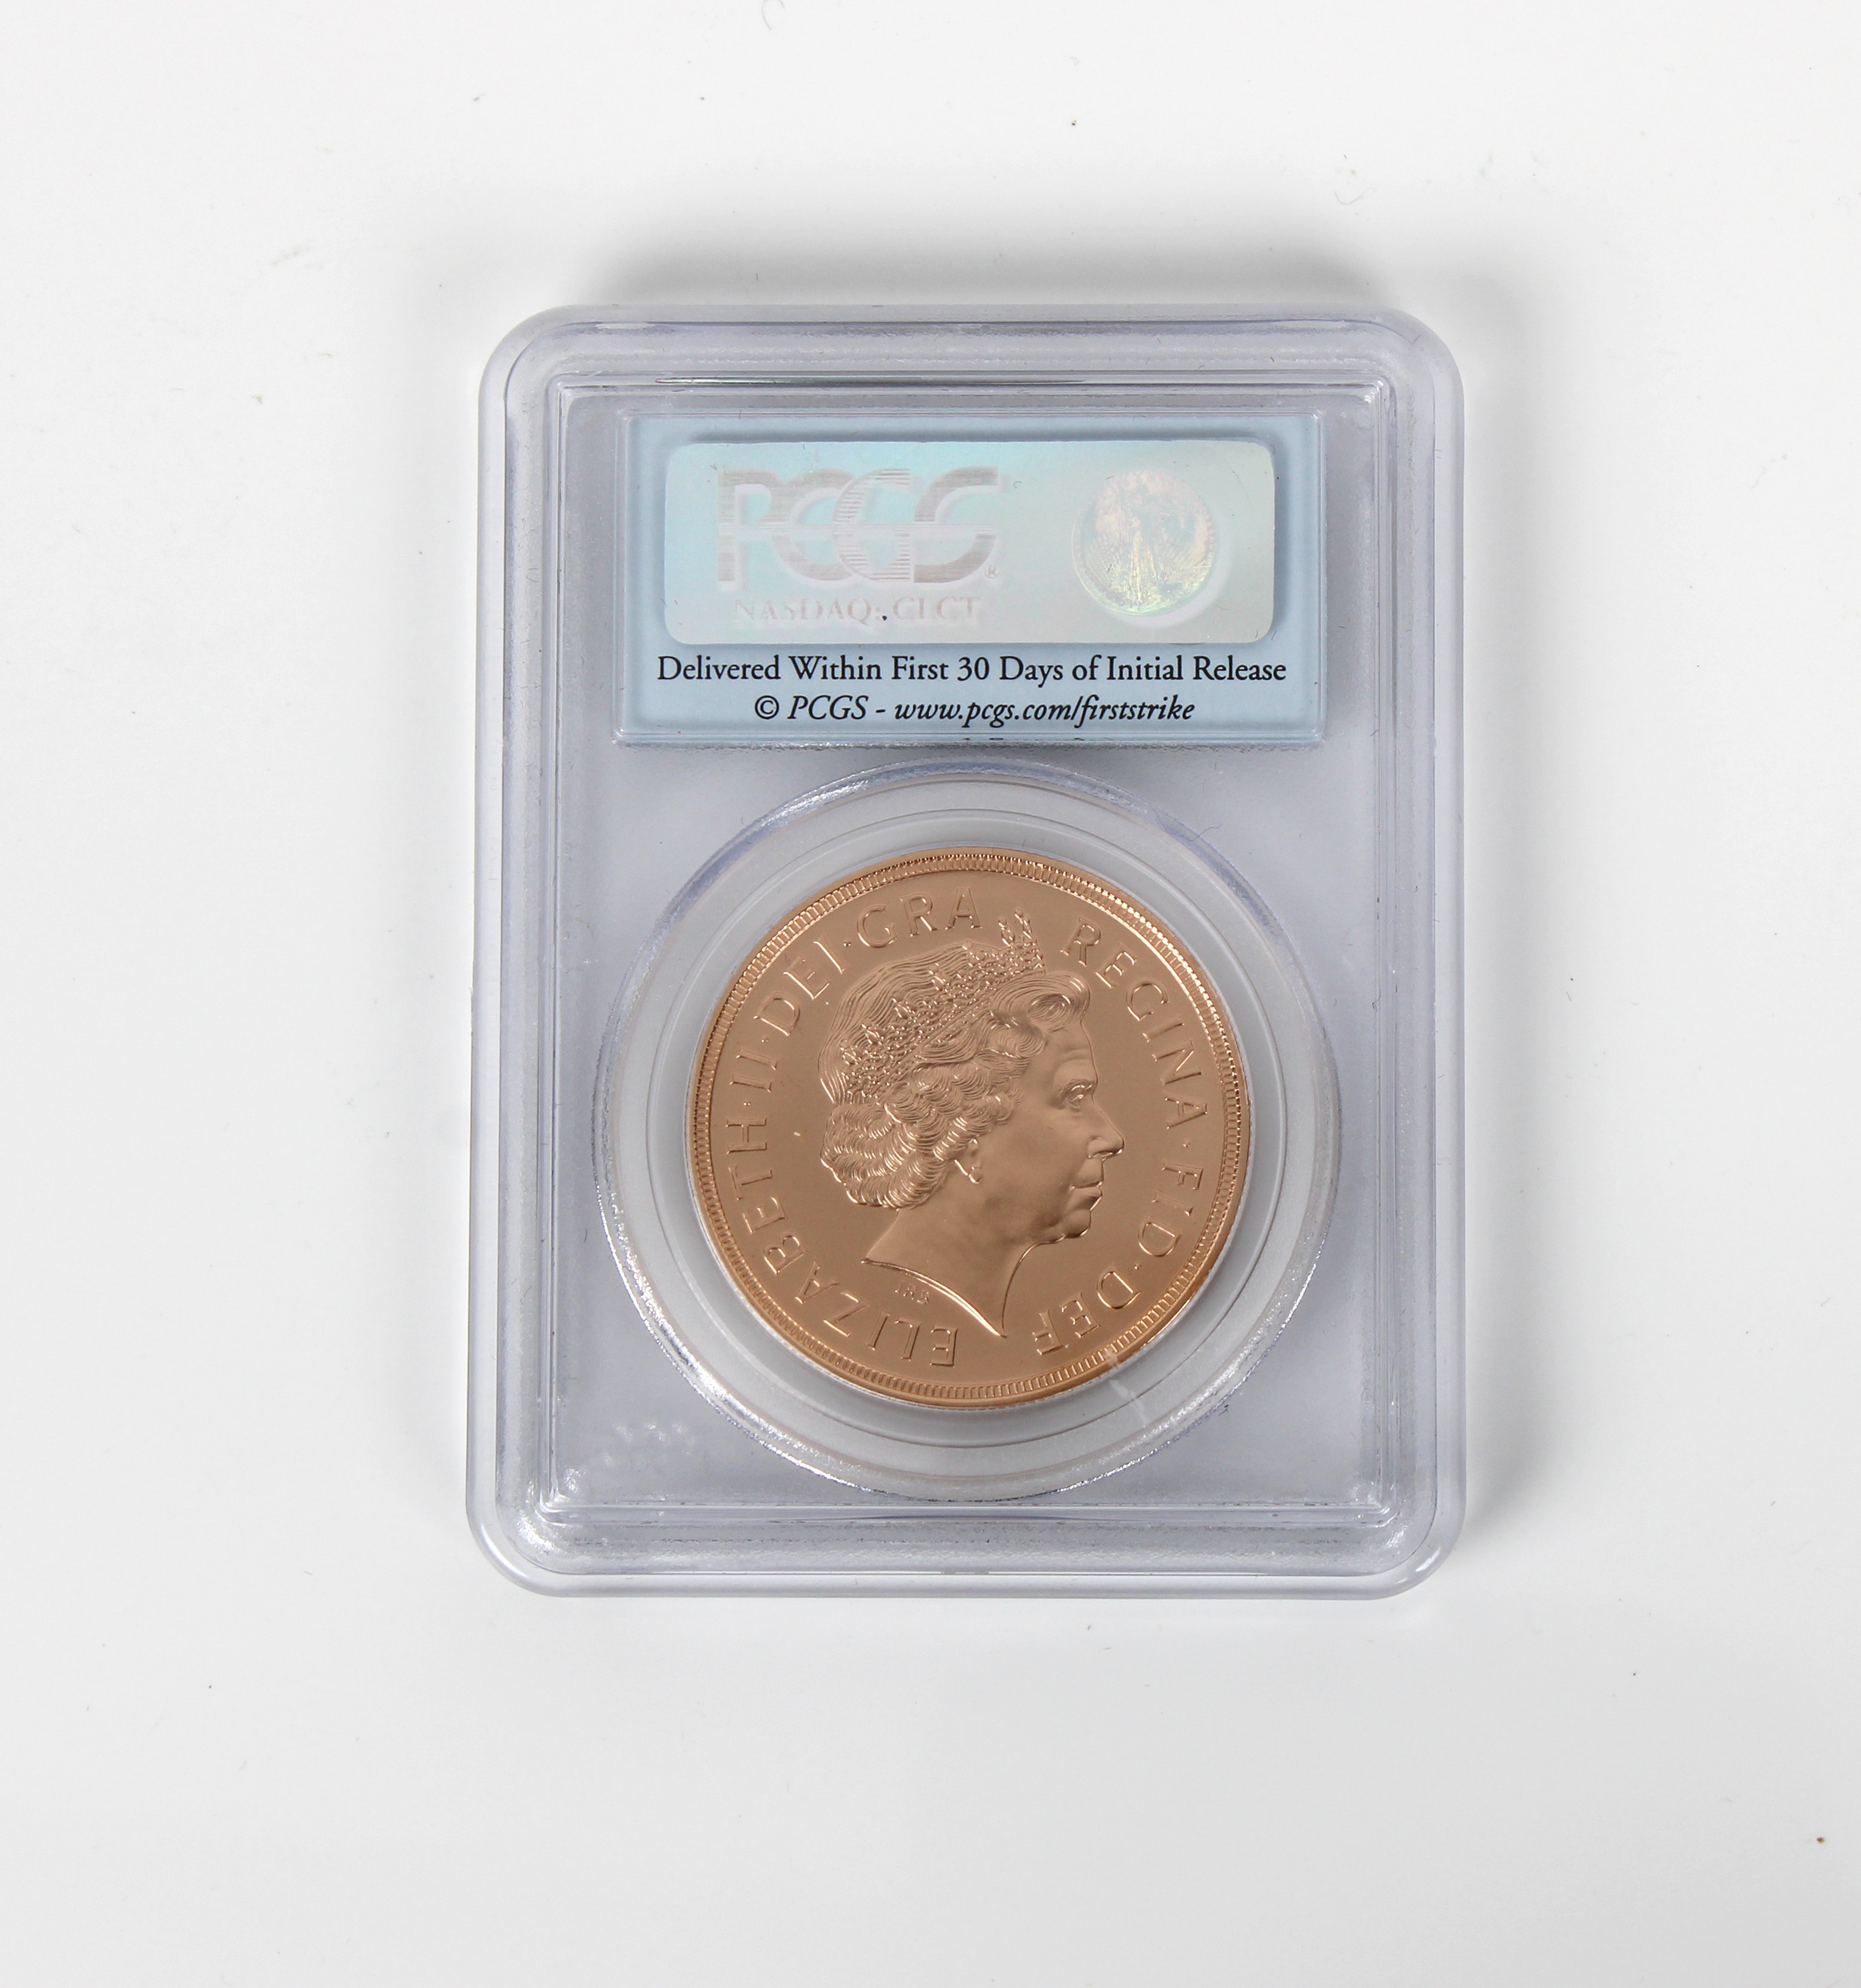 A St. George 2011 First Strike Five-Pound Gold Sovereign - PCGS graded - Image 2 of 2